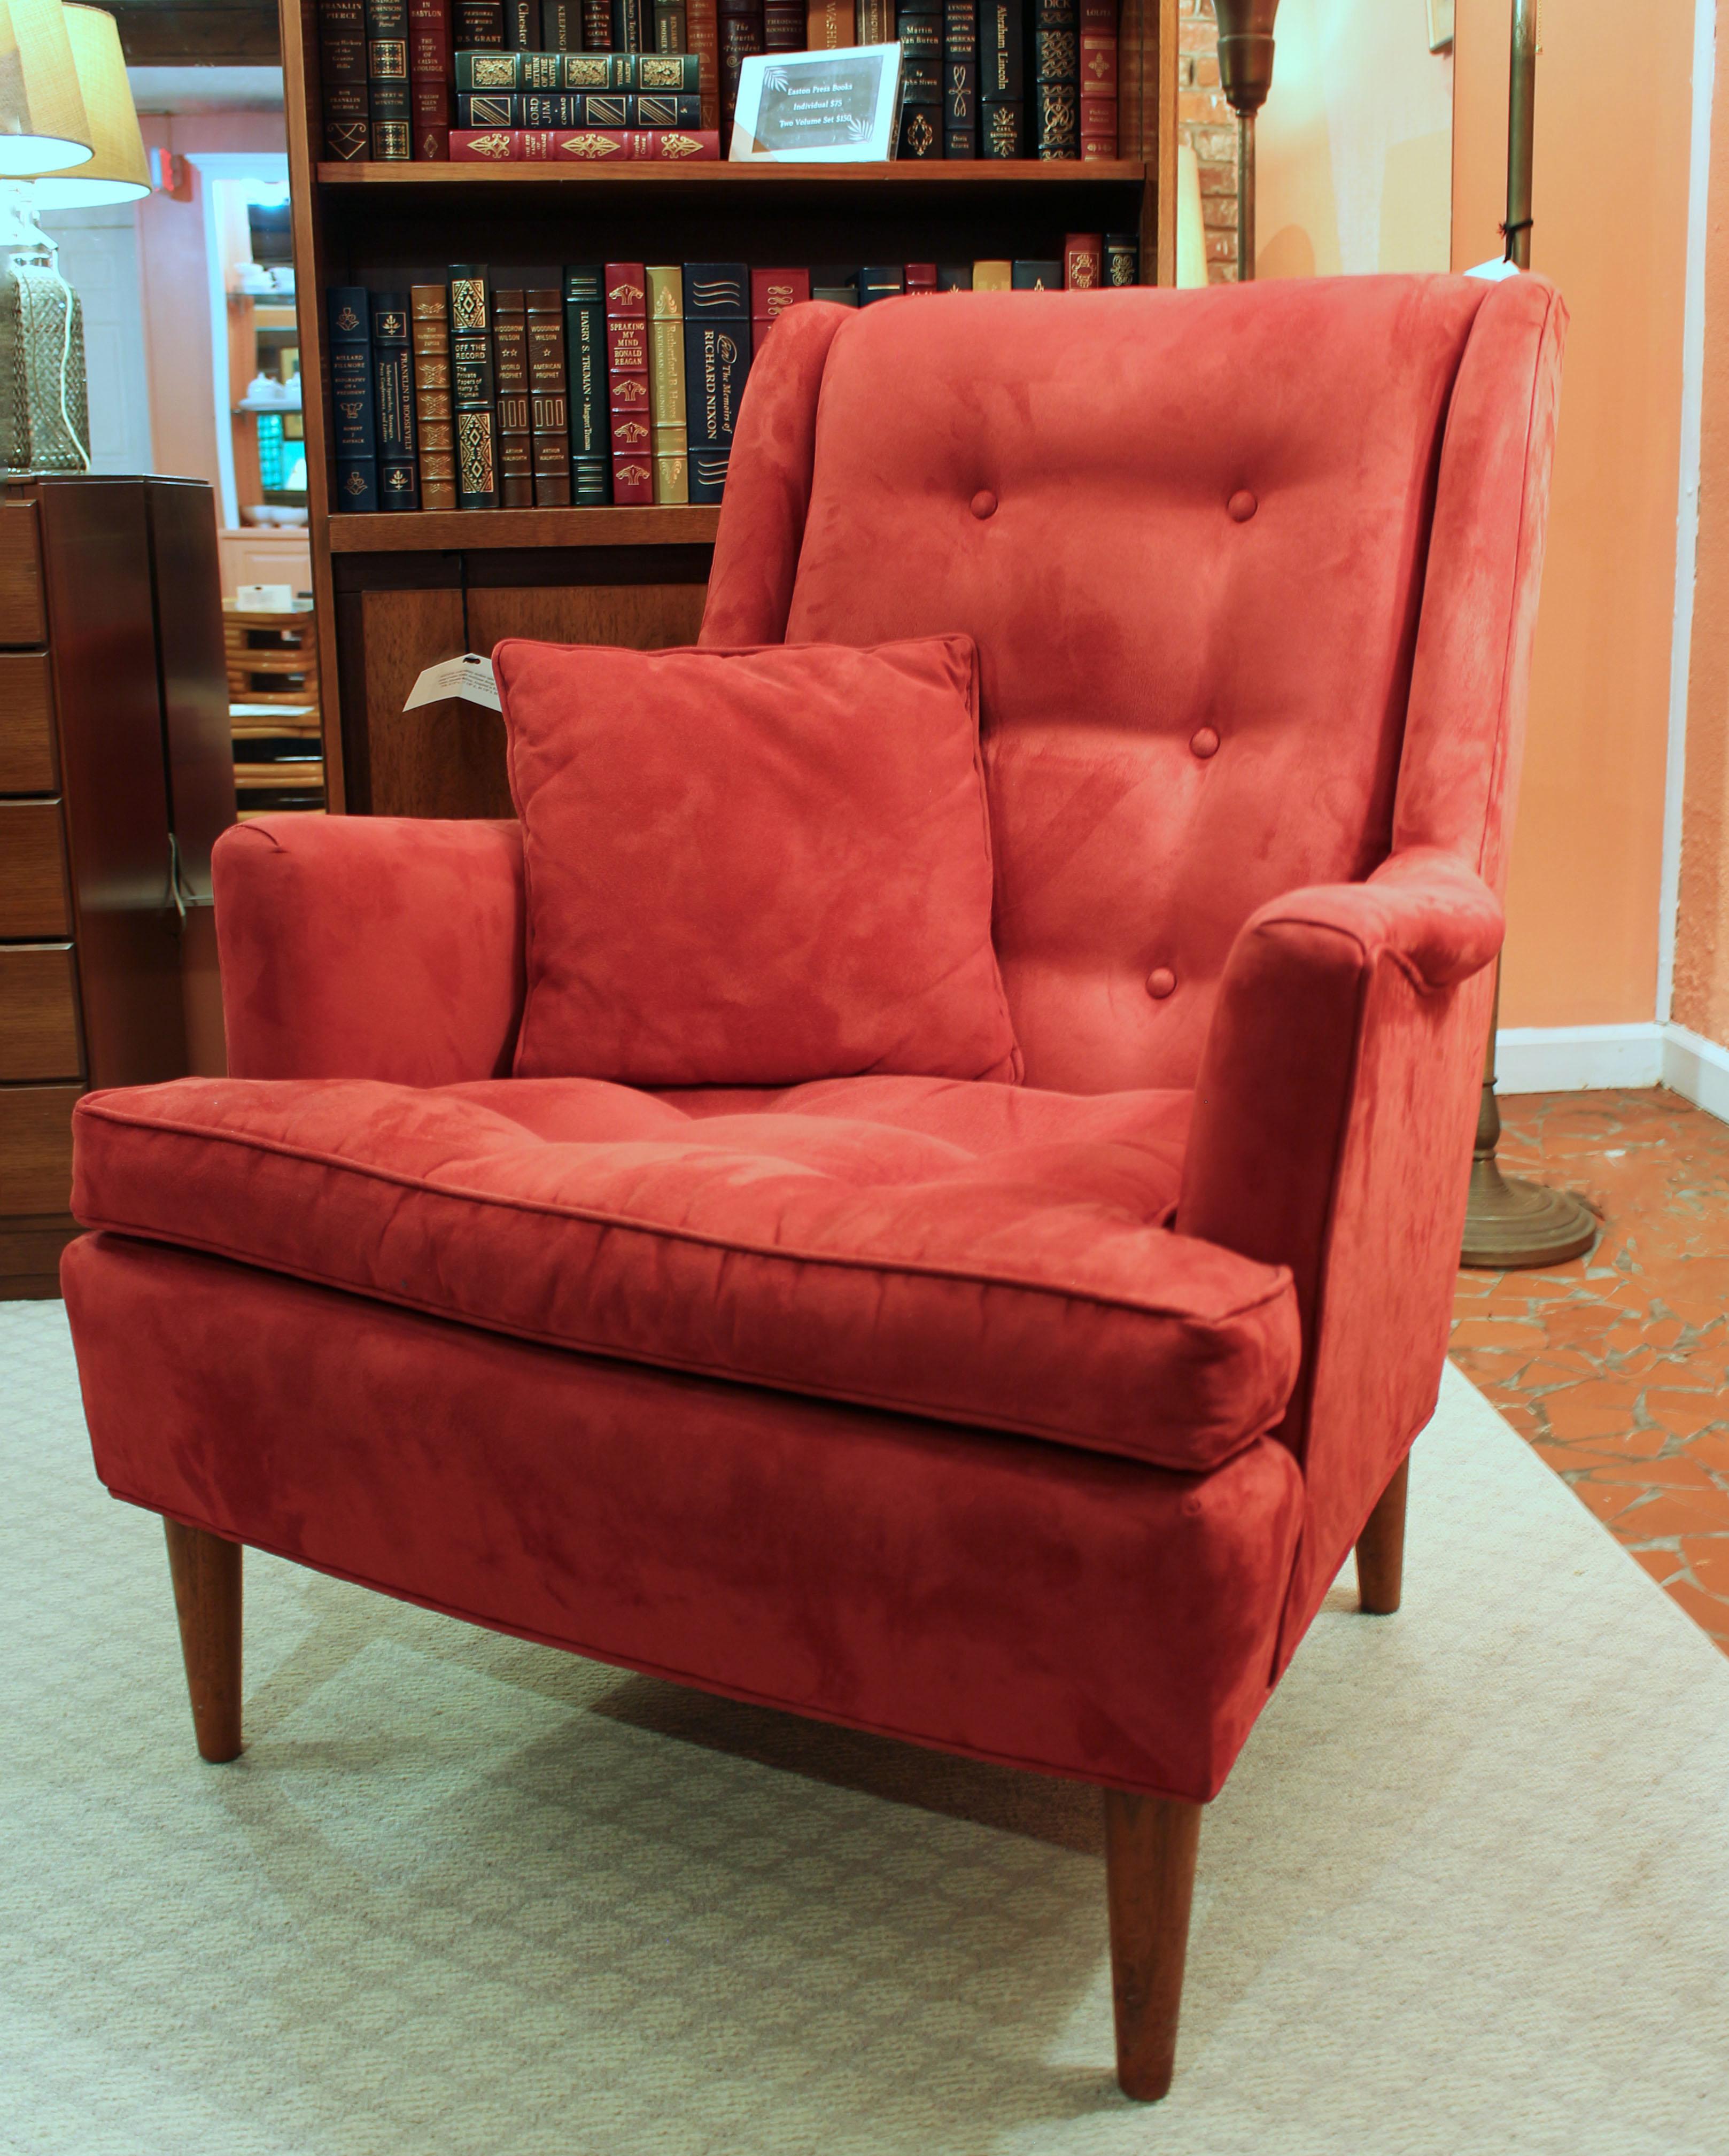 A c.1960 Henredon lounge chair. Handsome and comfortable raised on turned, tapered legs. Now in ultrasuede fabric. Acquired from Style Craft of Chapel Hill. Sculpted arms. Tufted back and seat. (Matching protective arm and head rest covers with some